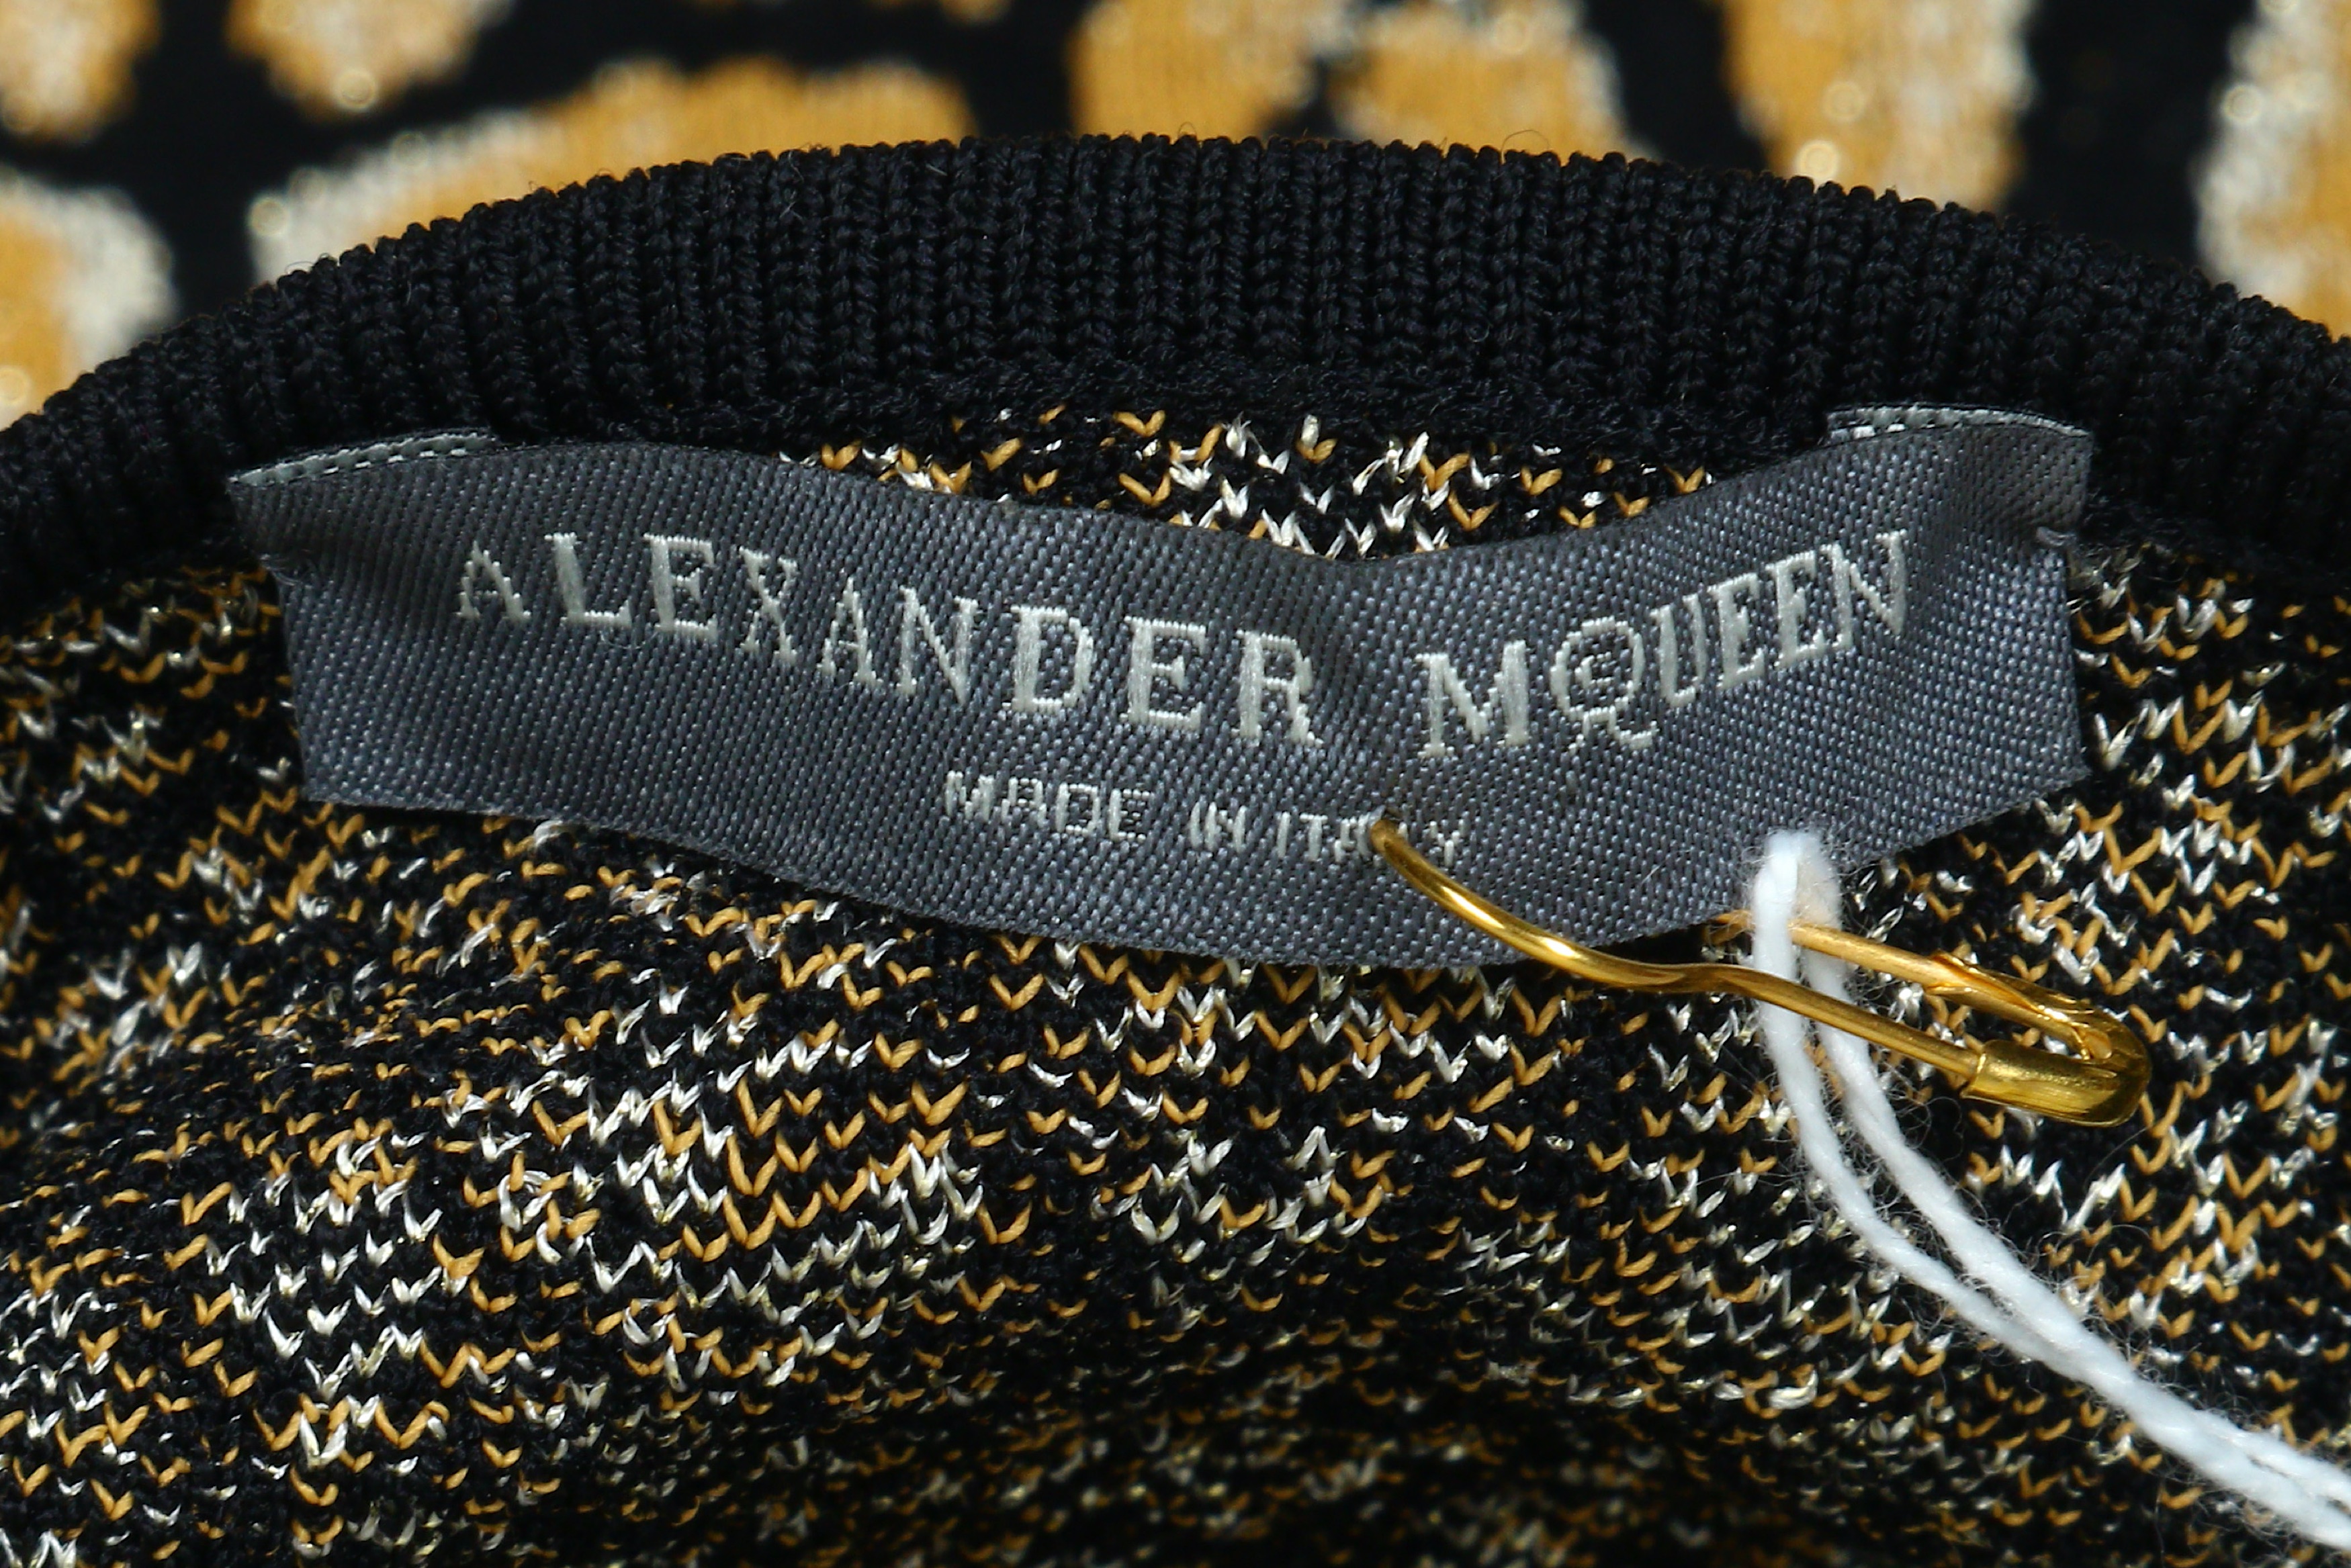 Alexander McQueen Stretch Knit Black and Gold Dress - Image 4 of 4